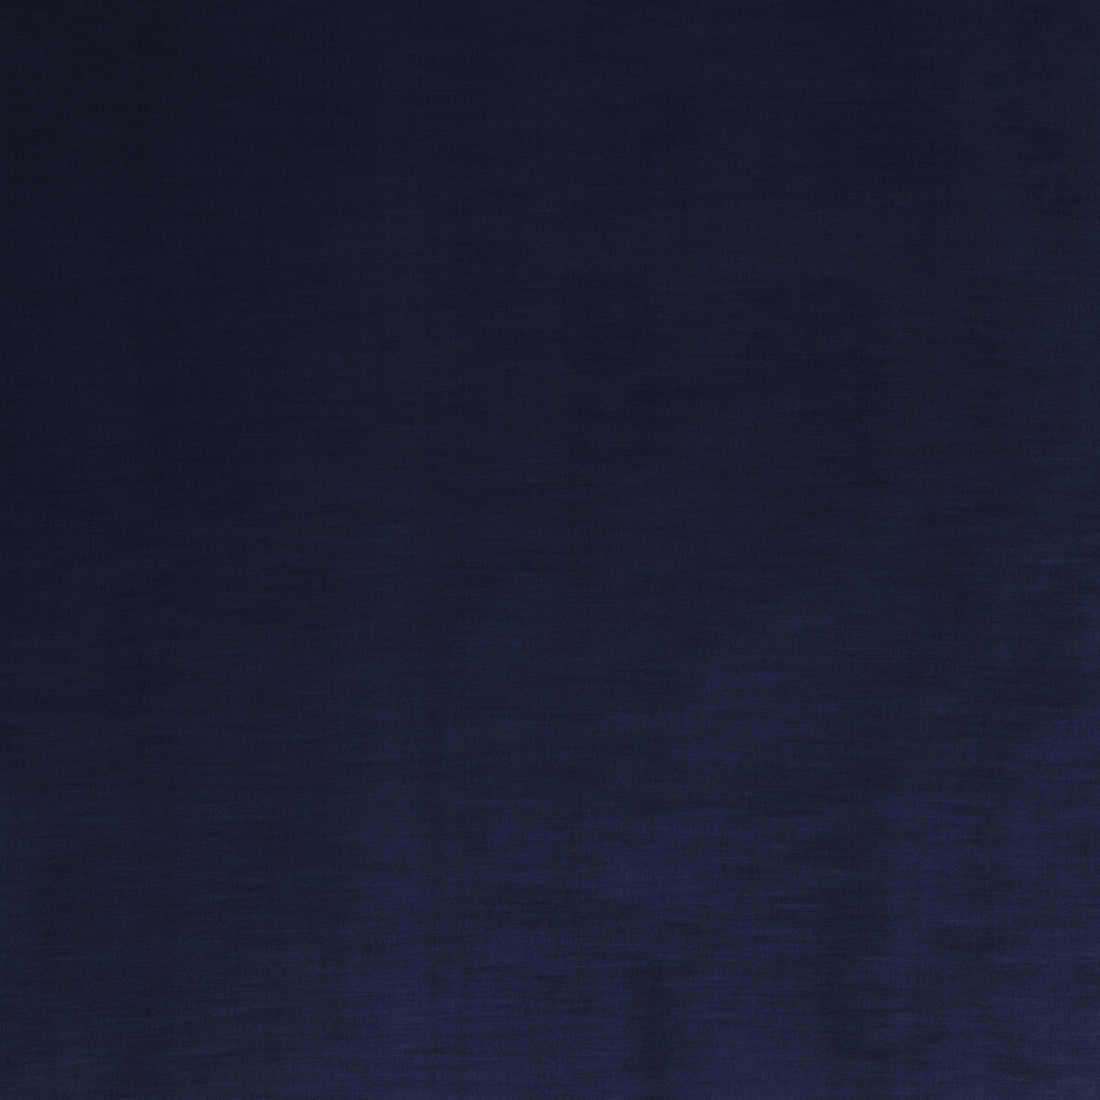 Coniston Velvet fabric in indigo color - pattern BF10781.680.0 - by G P &amp; J Baker in the Coniston Velvet collection